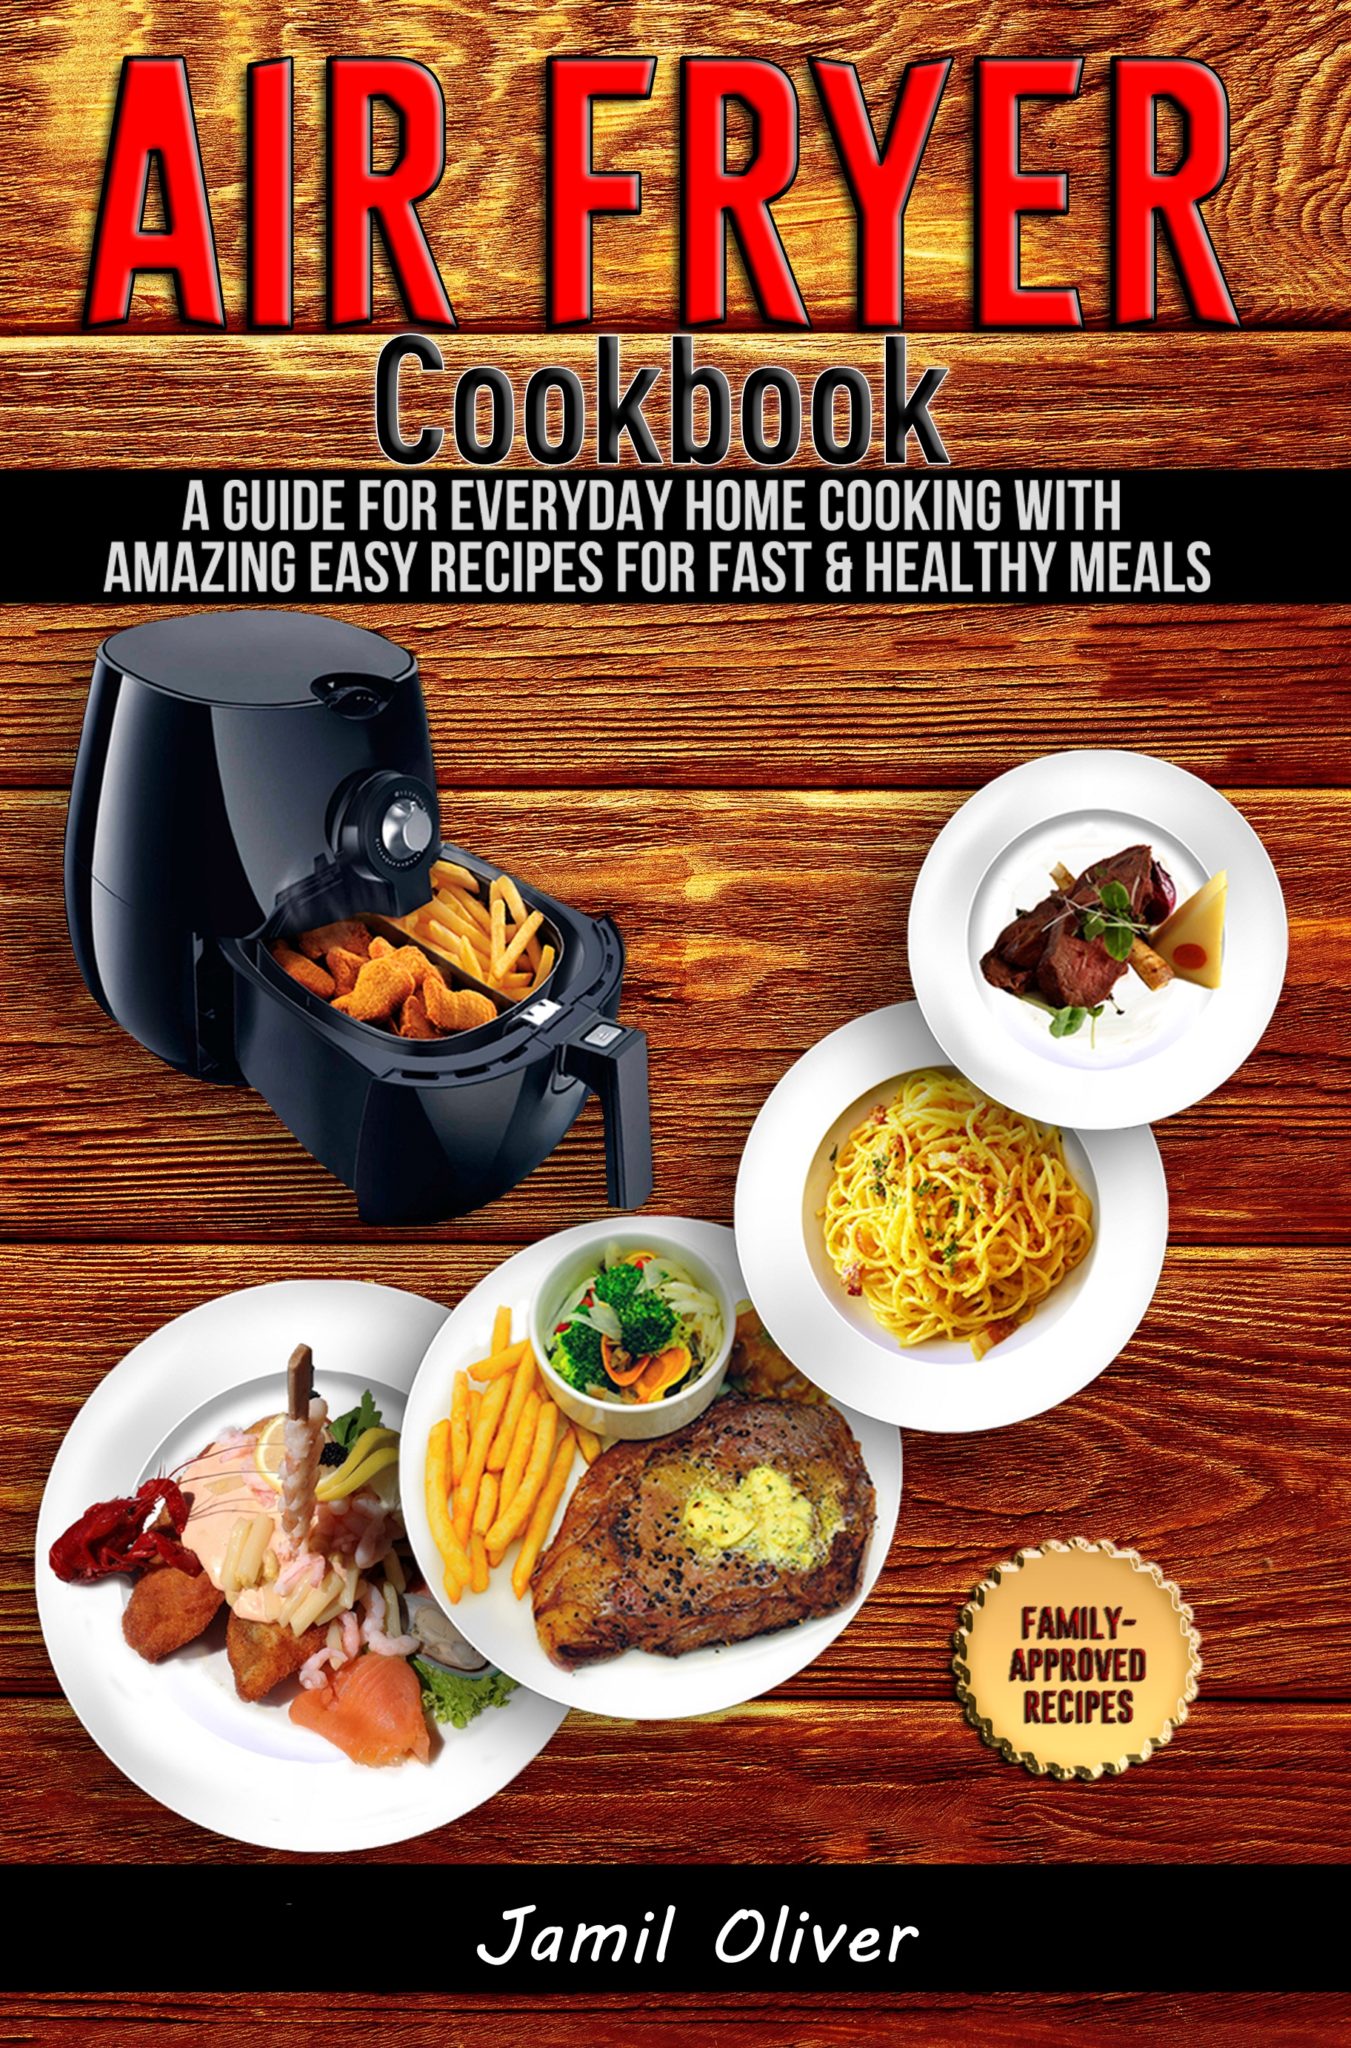 FREE: Air Fryer Cookbook. A Guide for Everyday Home Cooking with Amazing Easy Recipes for Fast & Healthy Meals by Jamil Oliver